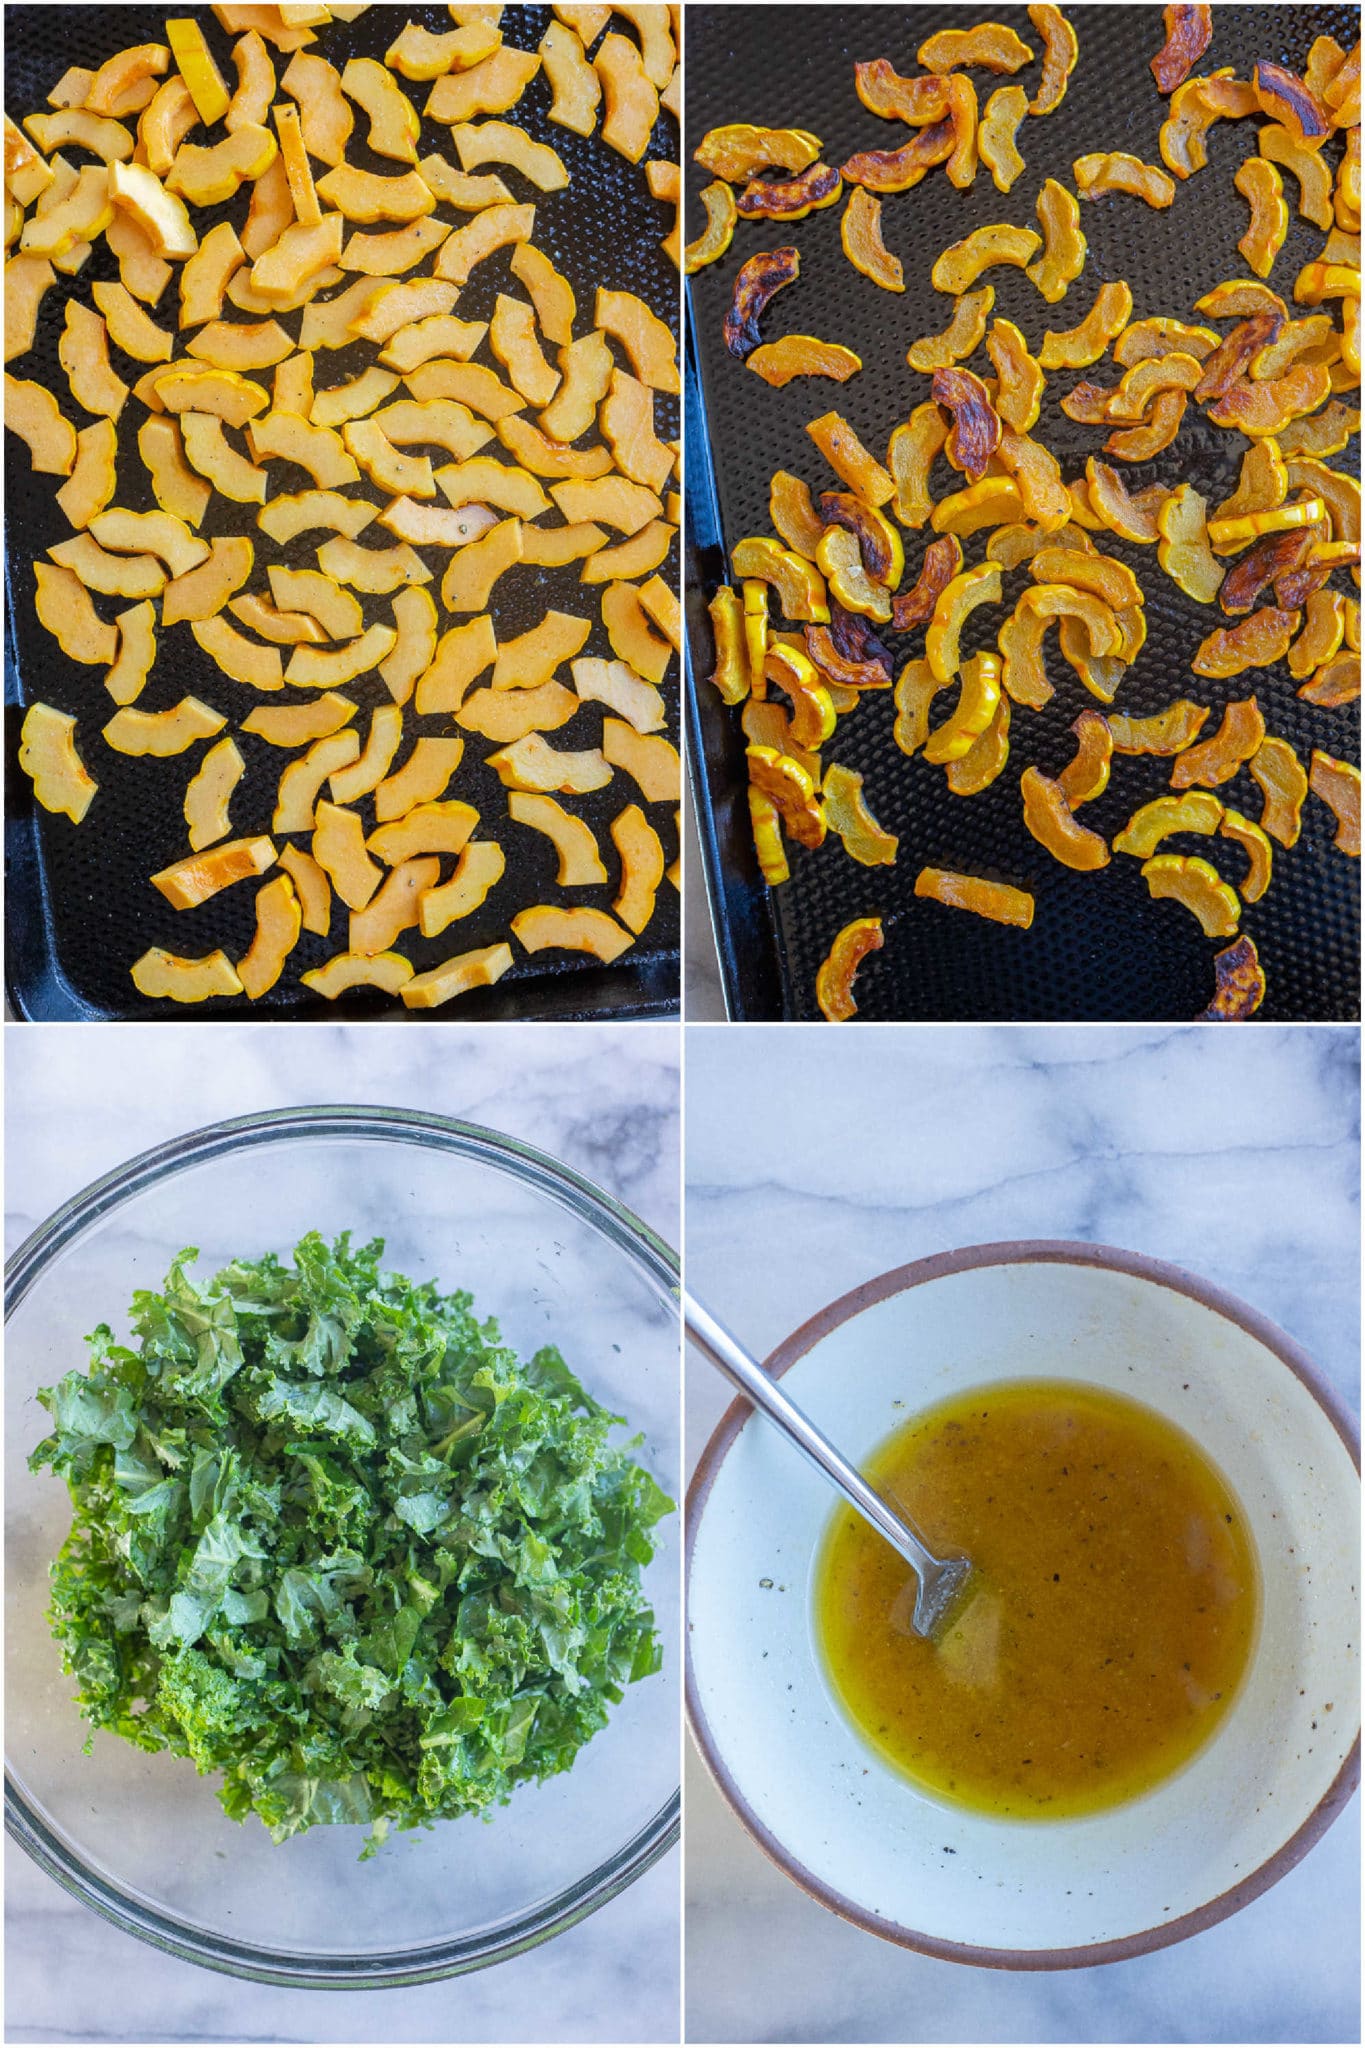 showing how to roast the winter squash and prepare the kale and salad dressing